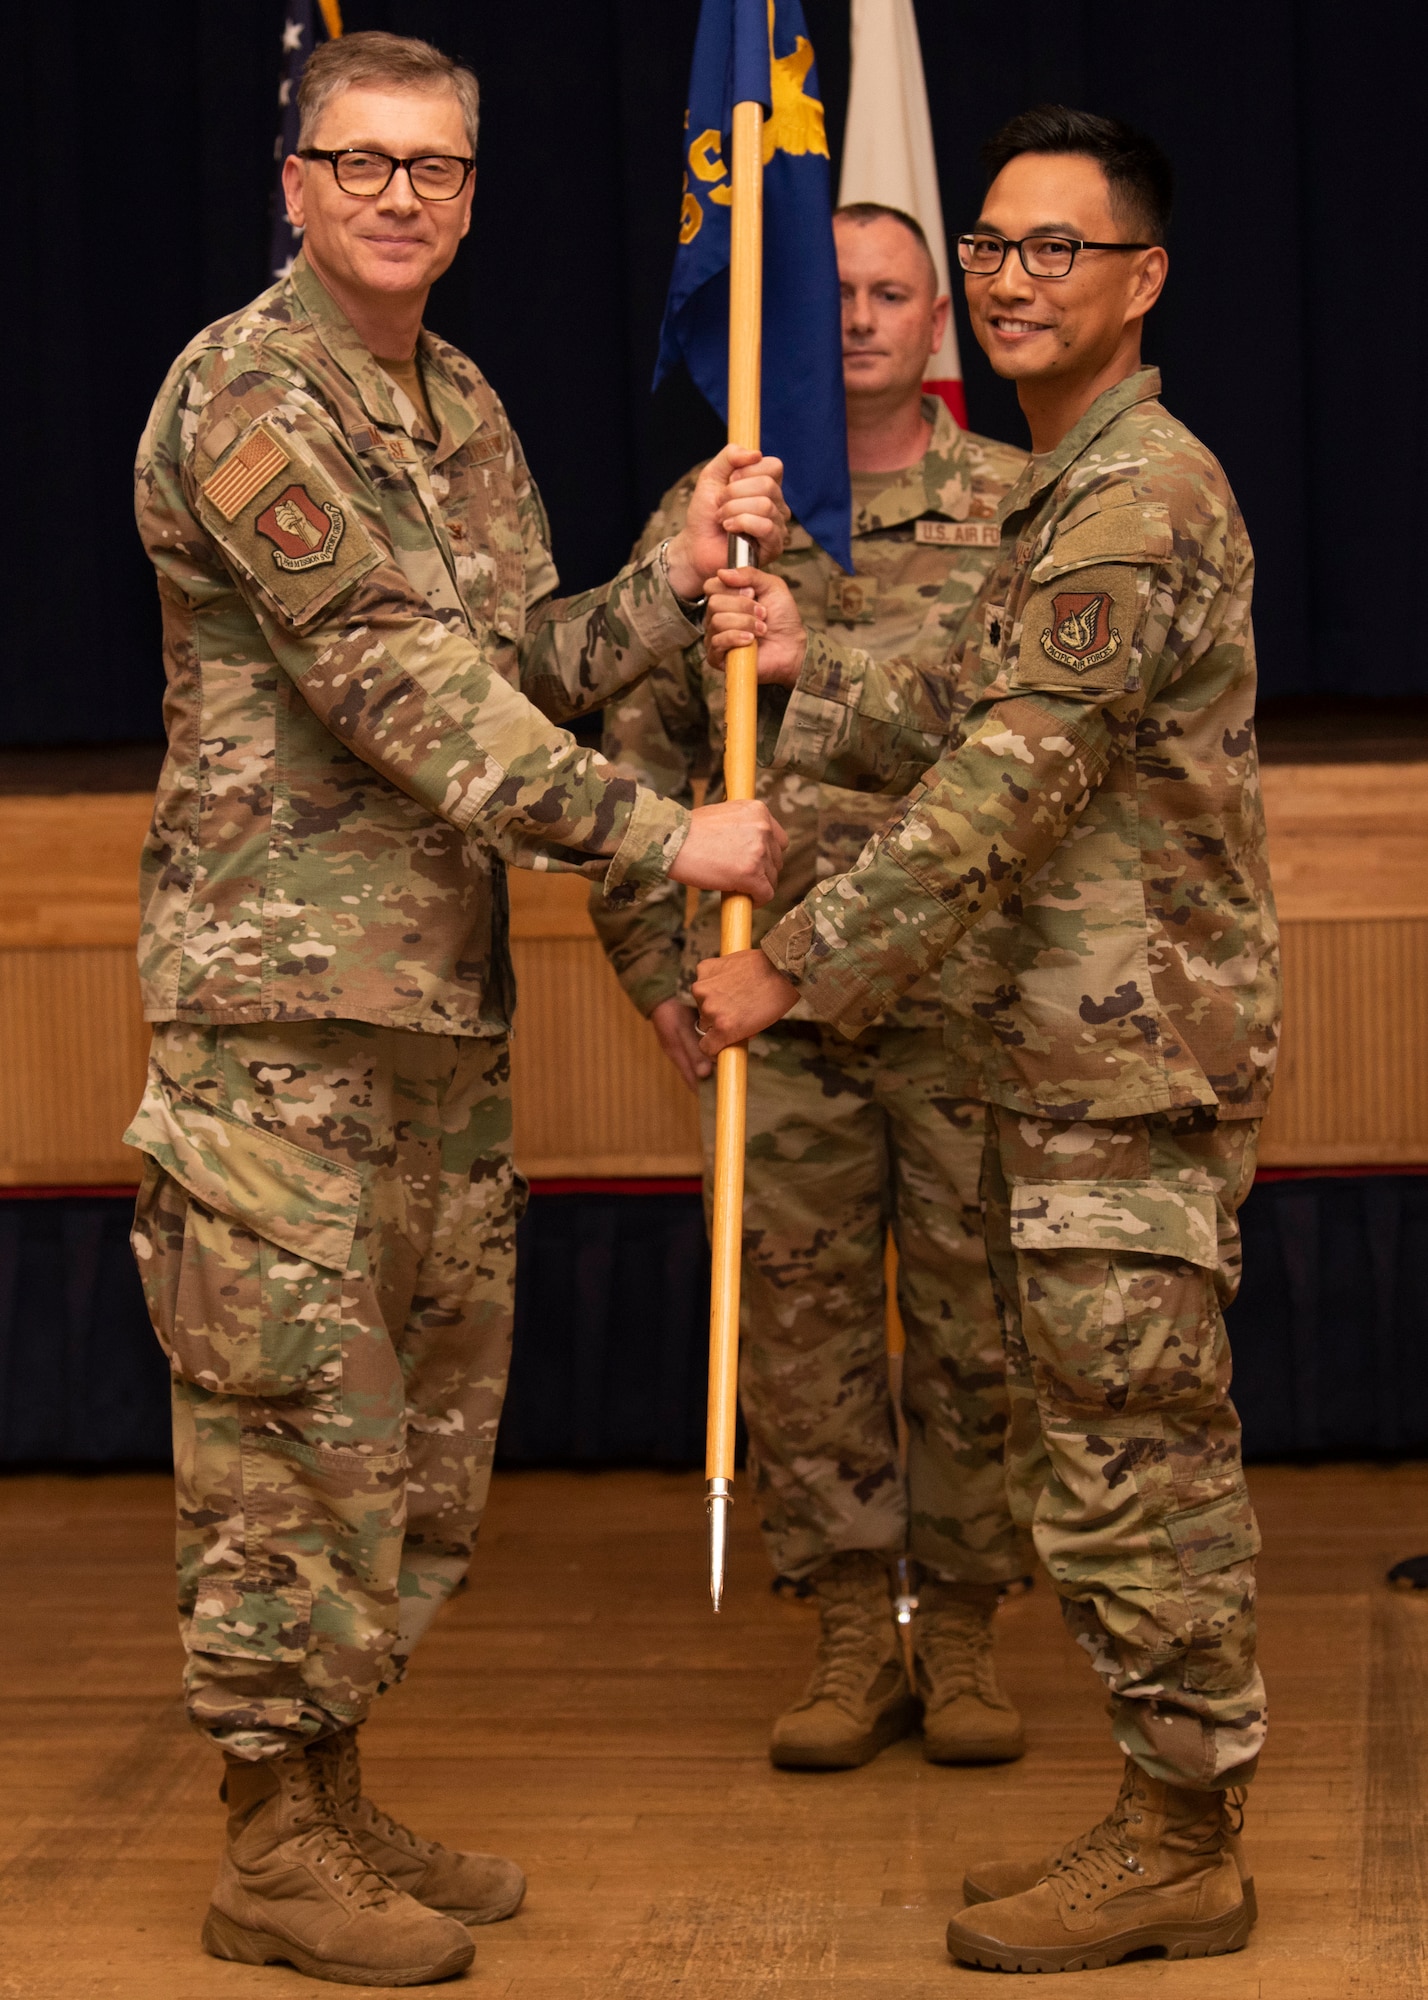 People in uniform perform an assumption of command indoors